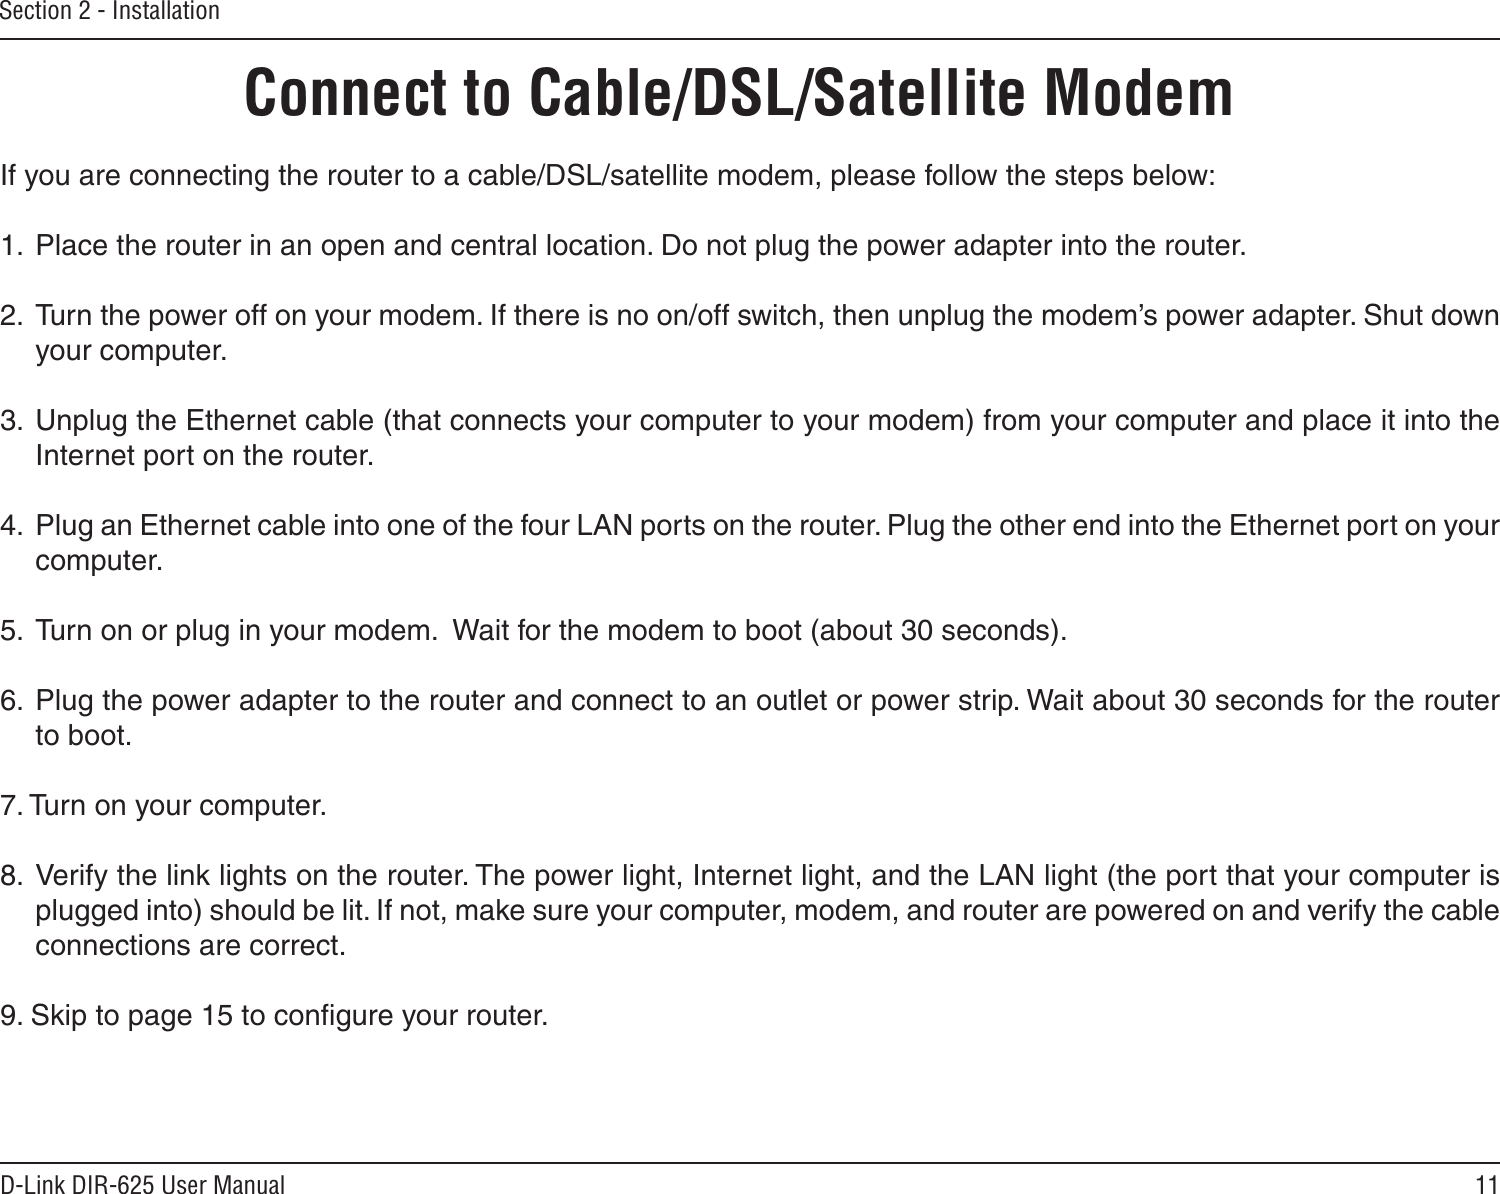 11D-Link DIR-625 User ManualSection 2 - InstallationIf you are connecting the router to a cable/DSL/satellite modem, please follow the steps below:1.  Place the router in an open and central location. Do not plug the power adapter into the router. 2.  Turn the power off on your modem. If there is no on/off switch, then unplug the modem’s power adapter. Shut down your computer.3.  Unplug the Ethernet cable (that connects your computer to your modem) from your computer and place it into the Internet port on the router.  4.  Plug an Ethernet cable into one of the four LAN ports on the router. Plug the other end into the Ethernet port on your computer.5.  Turn on or plug in your modem.  Wait for the modem to boot (about 30 seconds). 6.  Plug the power adapter to the router and connect to an outlet or power strip. Wait about 30 seconds for the router to boot. 7. Turn on your computer. 8.  Verify the link lights on the router. The power light, Internet light, and the LAN light (the port that your computer is plugged into) should be lit. If not, make sure your computer, modem, and router are powered on and verify the cable connections are correct. 9. Skip to page 15 to conﬁgure your router. Connect to Cable/DSL/Satellite Modem